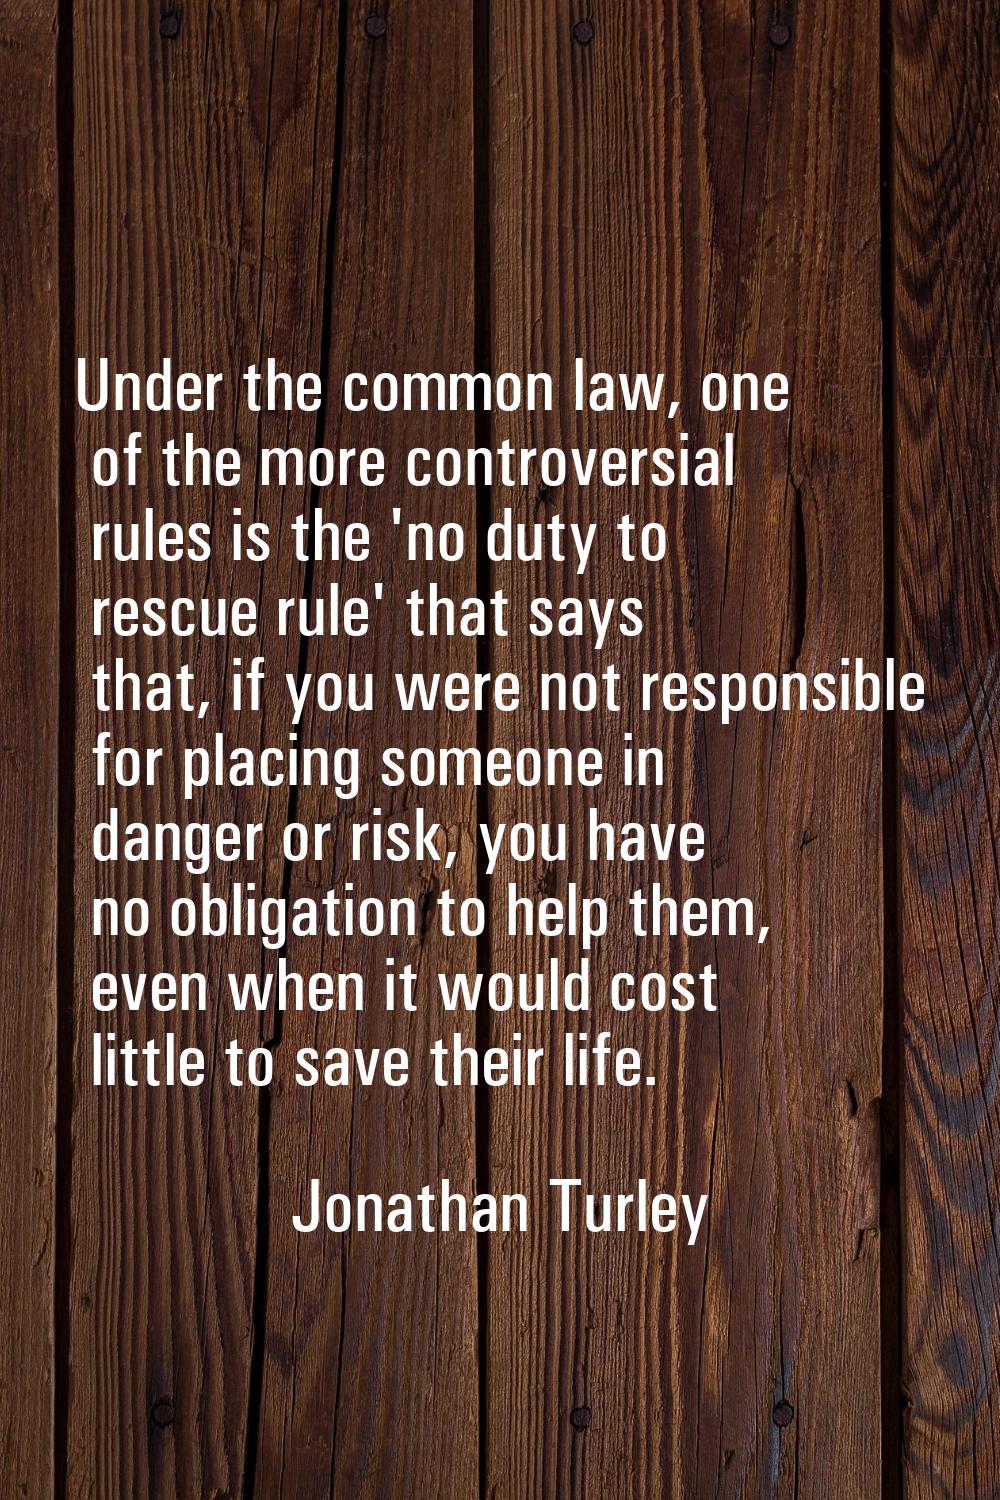 Under the common law, one of the more controversial rules is the 'no duty to rescue rule' that says